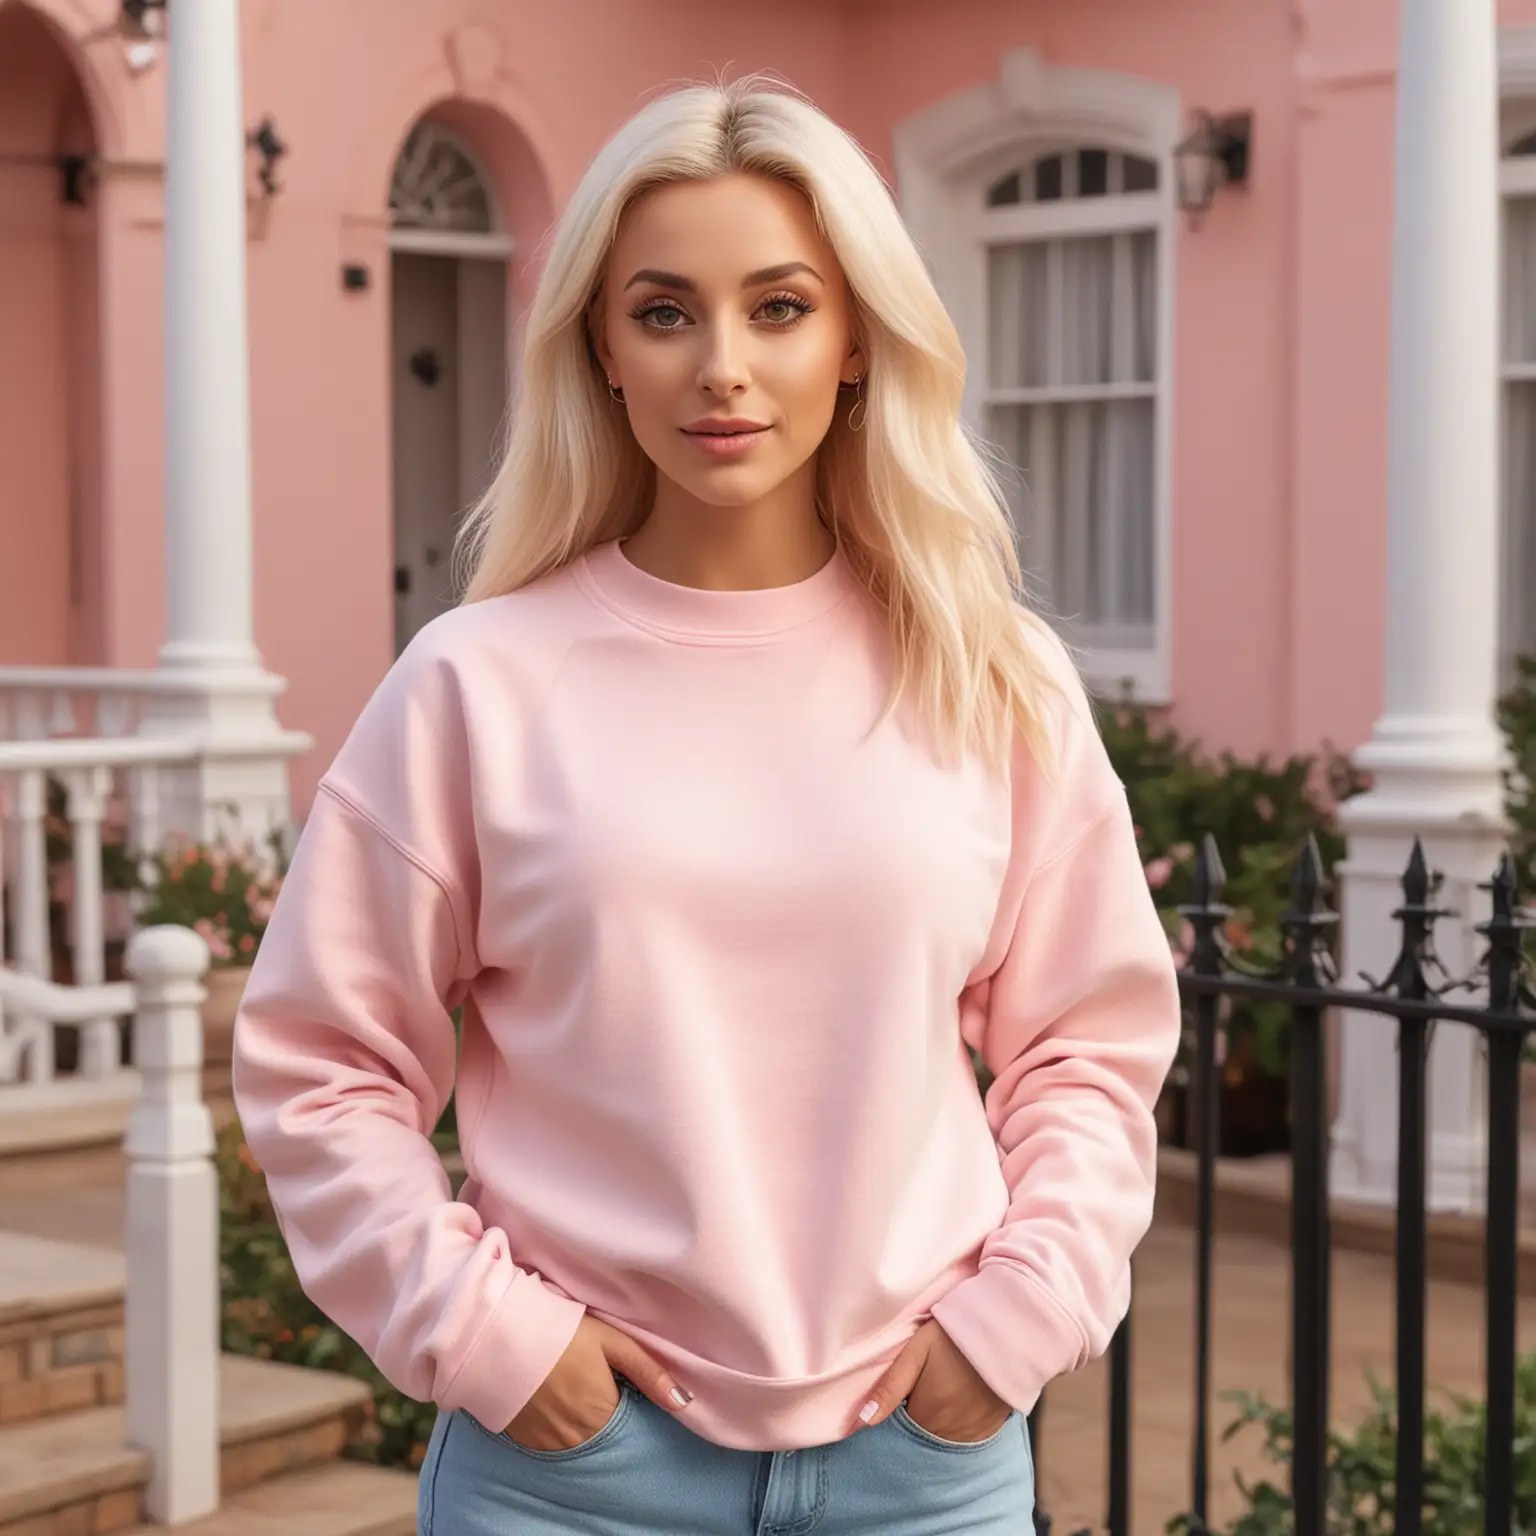 Blonde Model in Pale Pink Sweatshirt Channeling Chers Style at a Luxurious Mansion